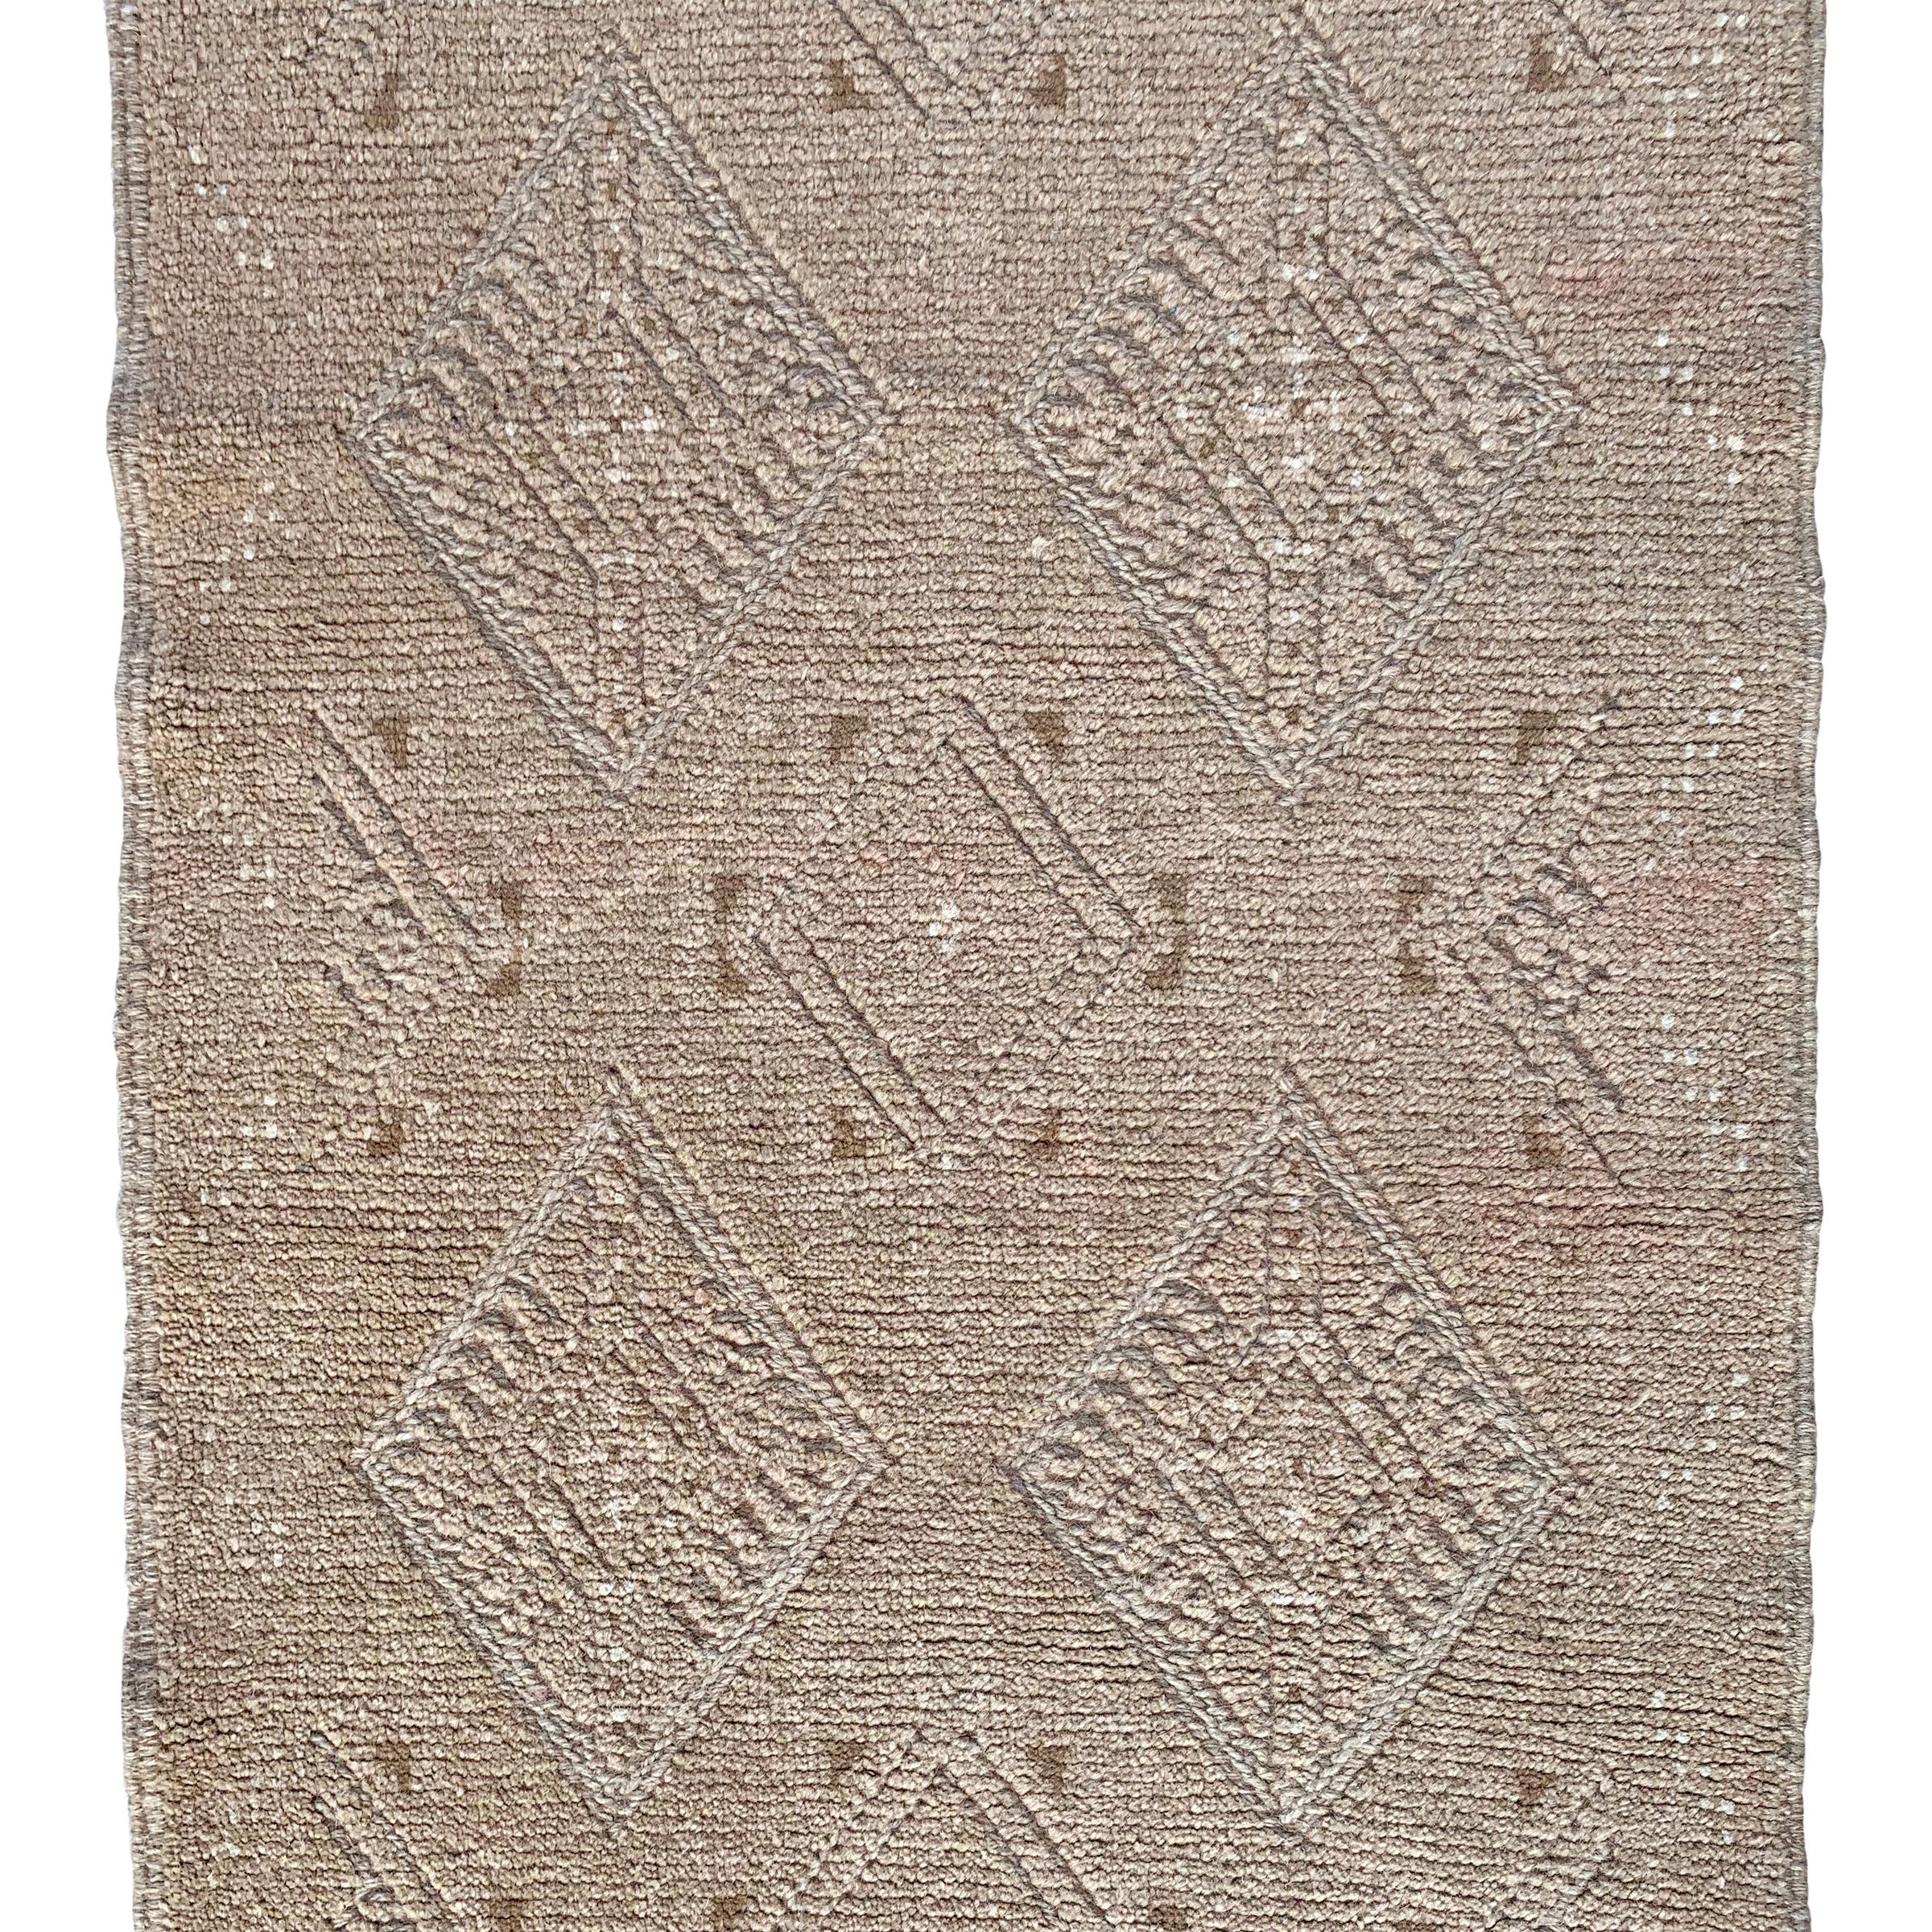 A wonderful vintage late 20th century Persian Gabbeh runner with a beautiful tone on tone woven pattern containing multiple diamonds running the length of the rug.